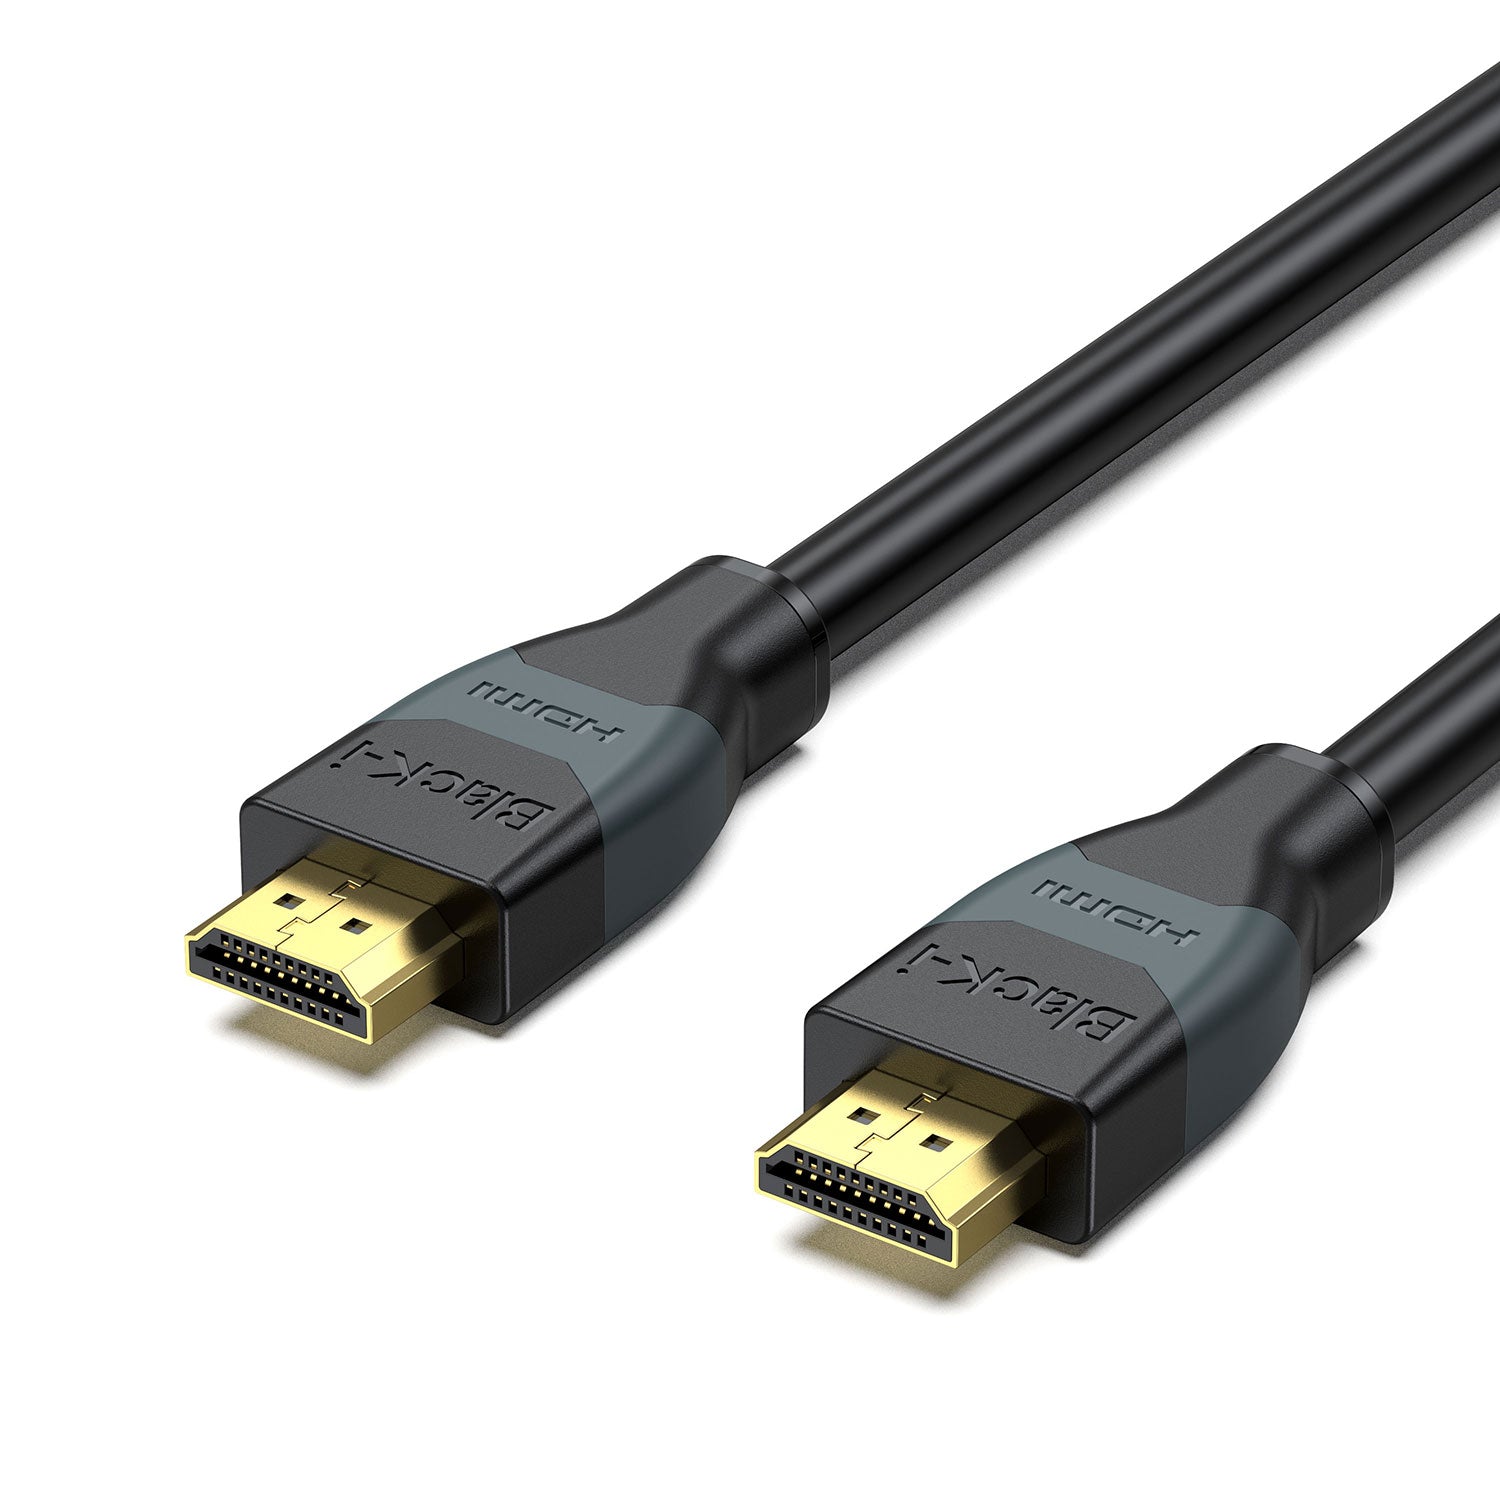 HDMI 2.0 4k cable from black-i